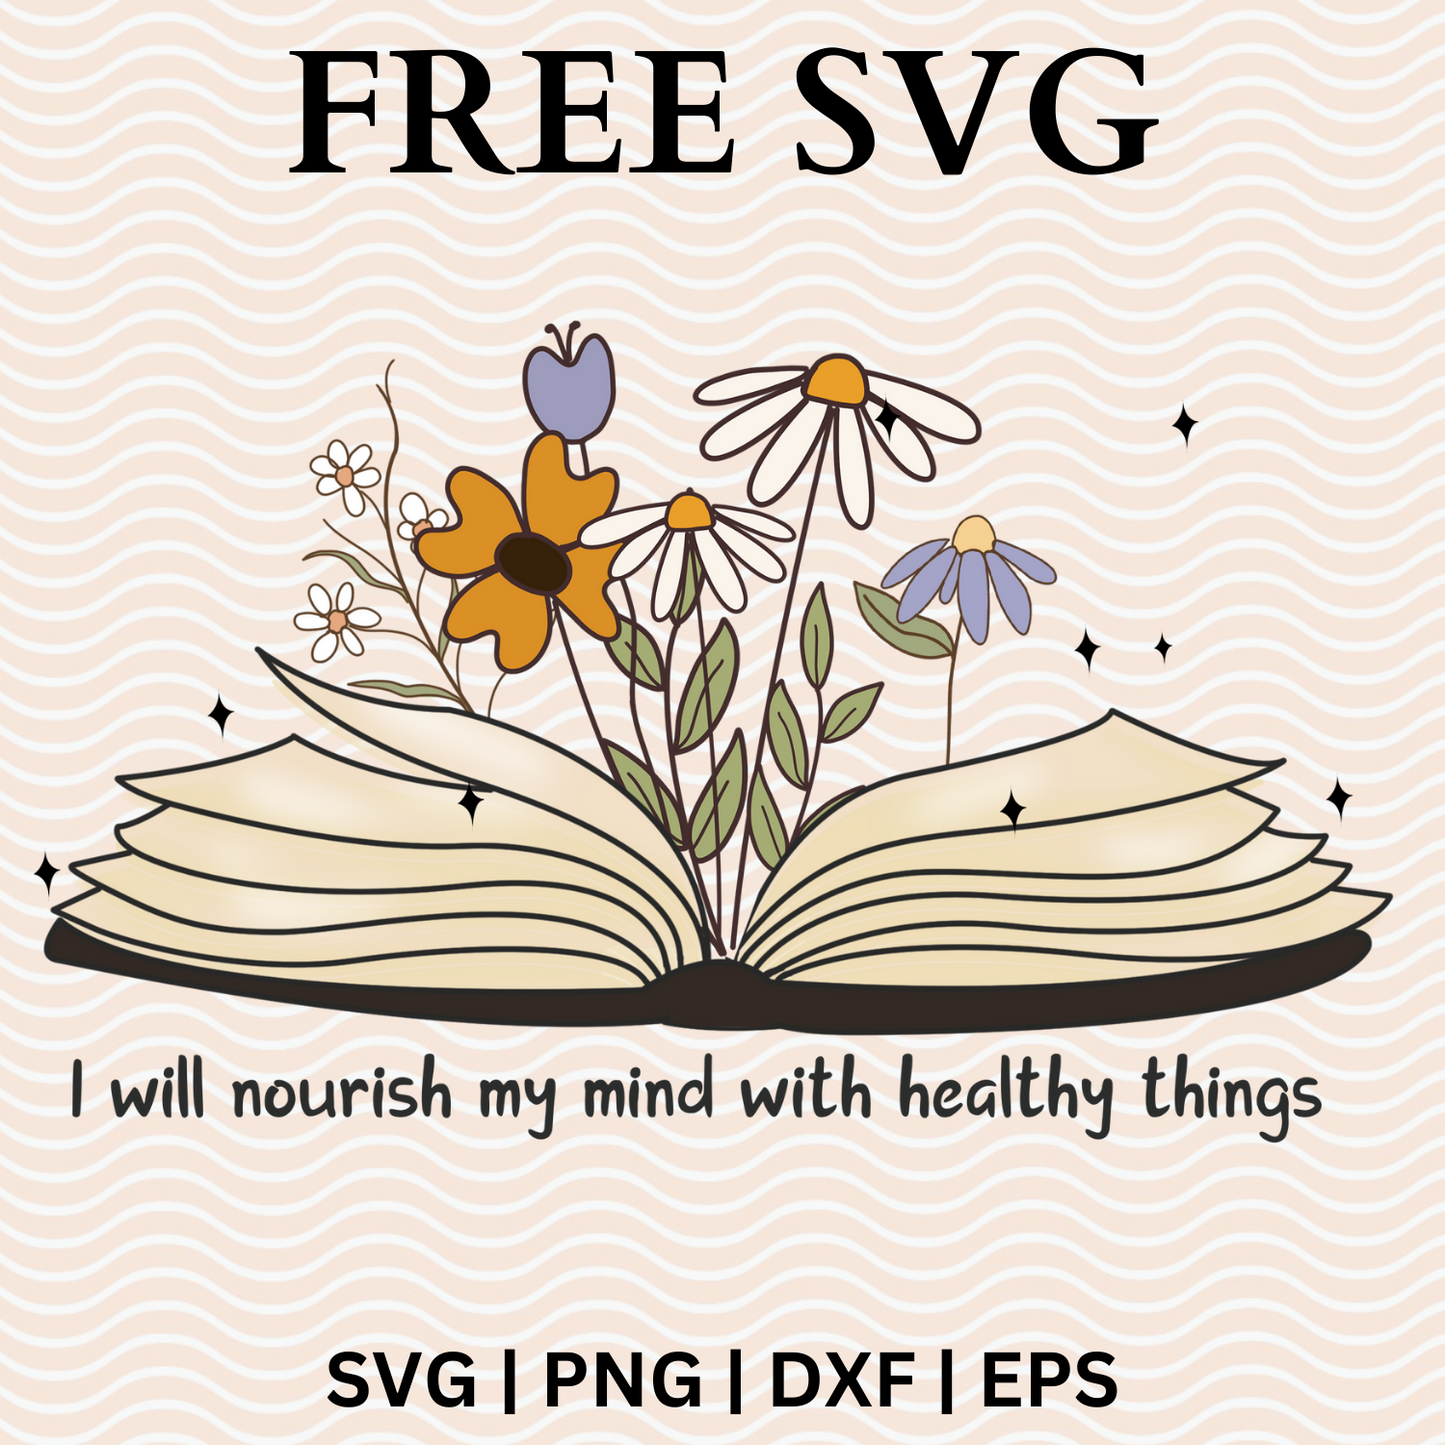 I will nourish my mind with Healthy things SVG Free File For Cricut & PNG Download-8SVG